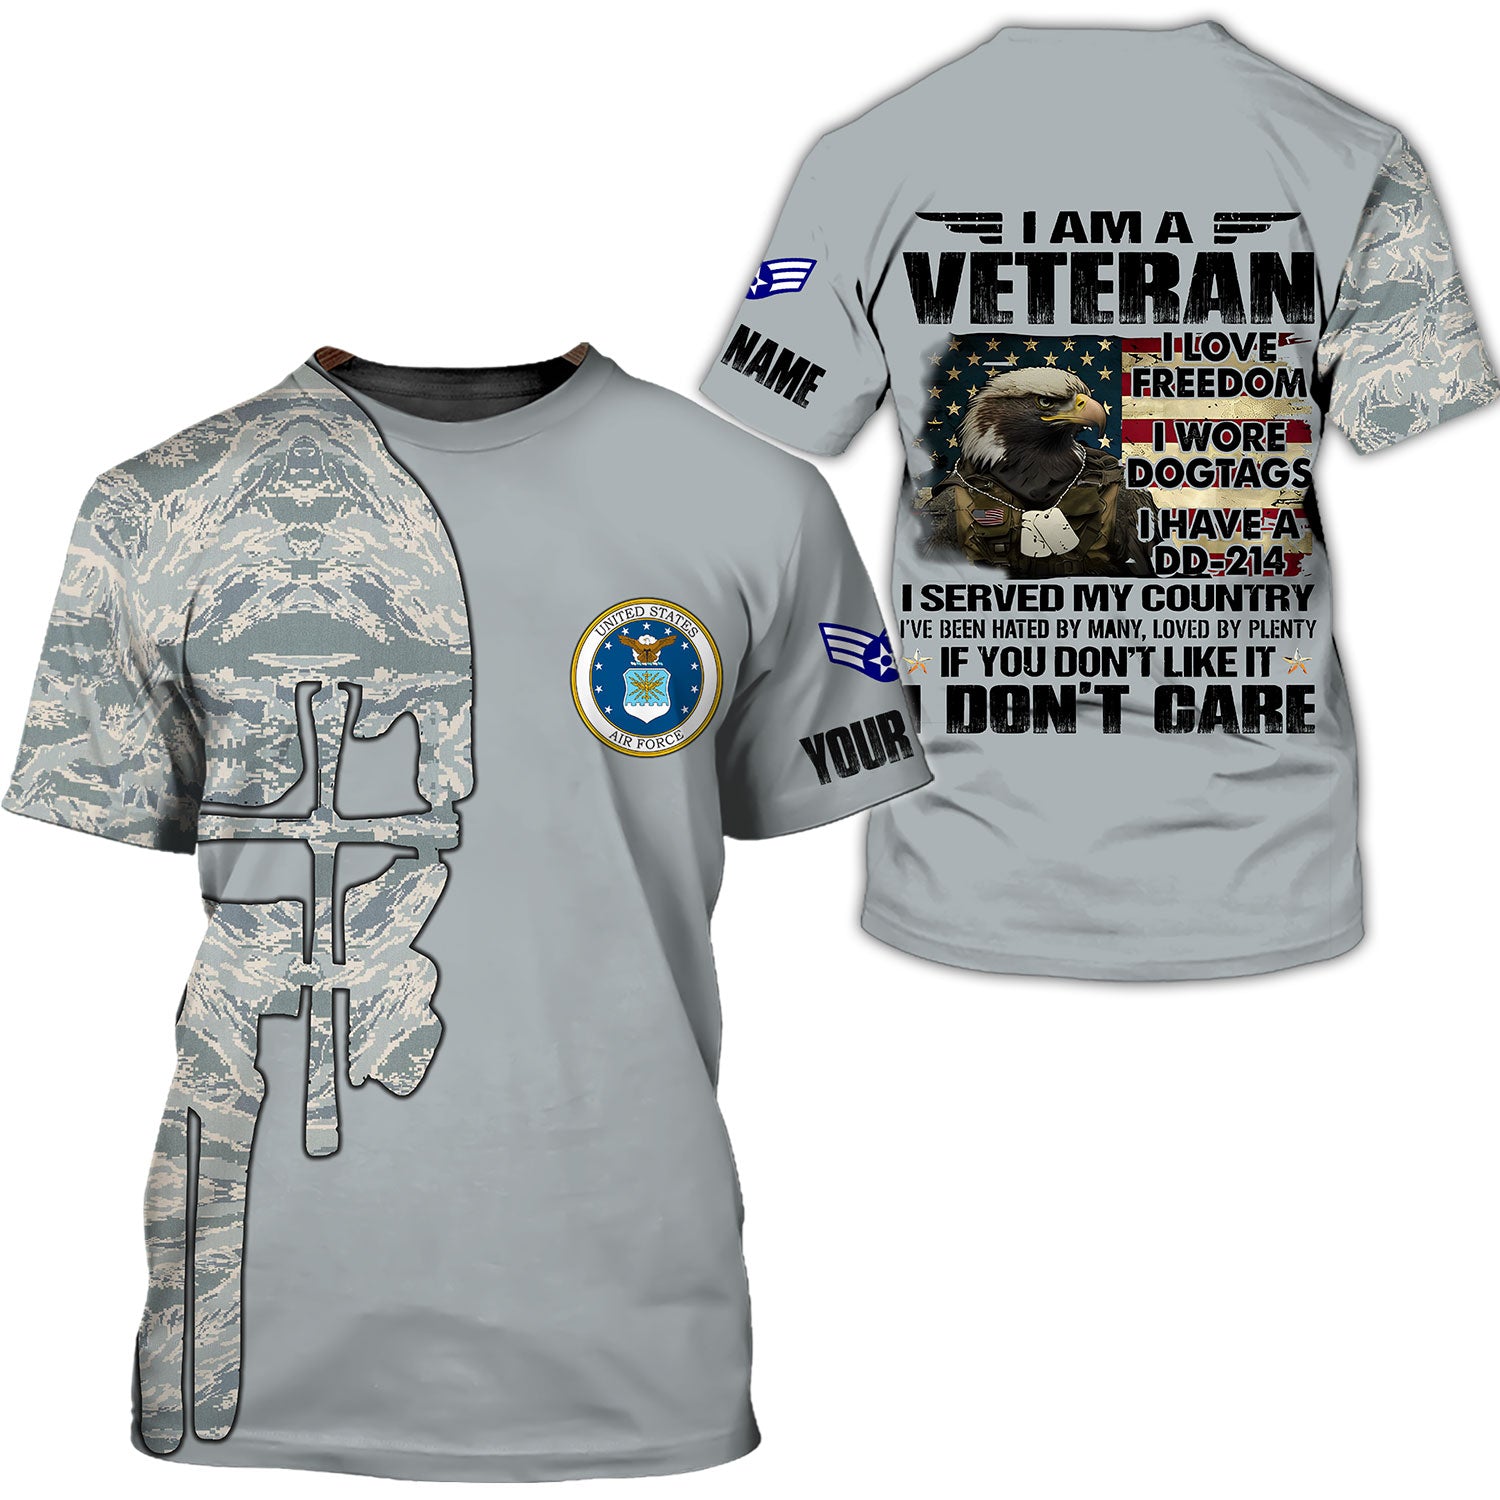 I Am Veteran - I love Freedom - I Wore Dogtags - I Have A DD-214 - Customized U.S. Veteran Air Force T-Shirt, Gift For Veterans